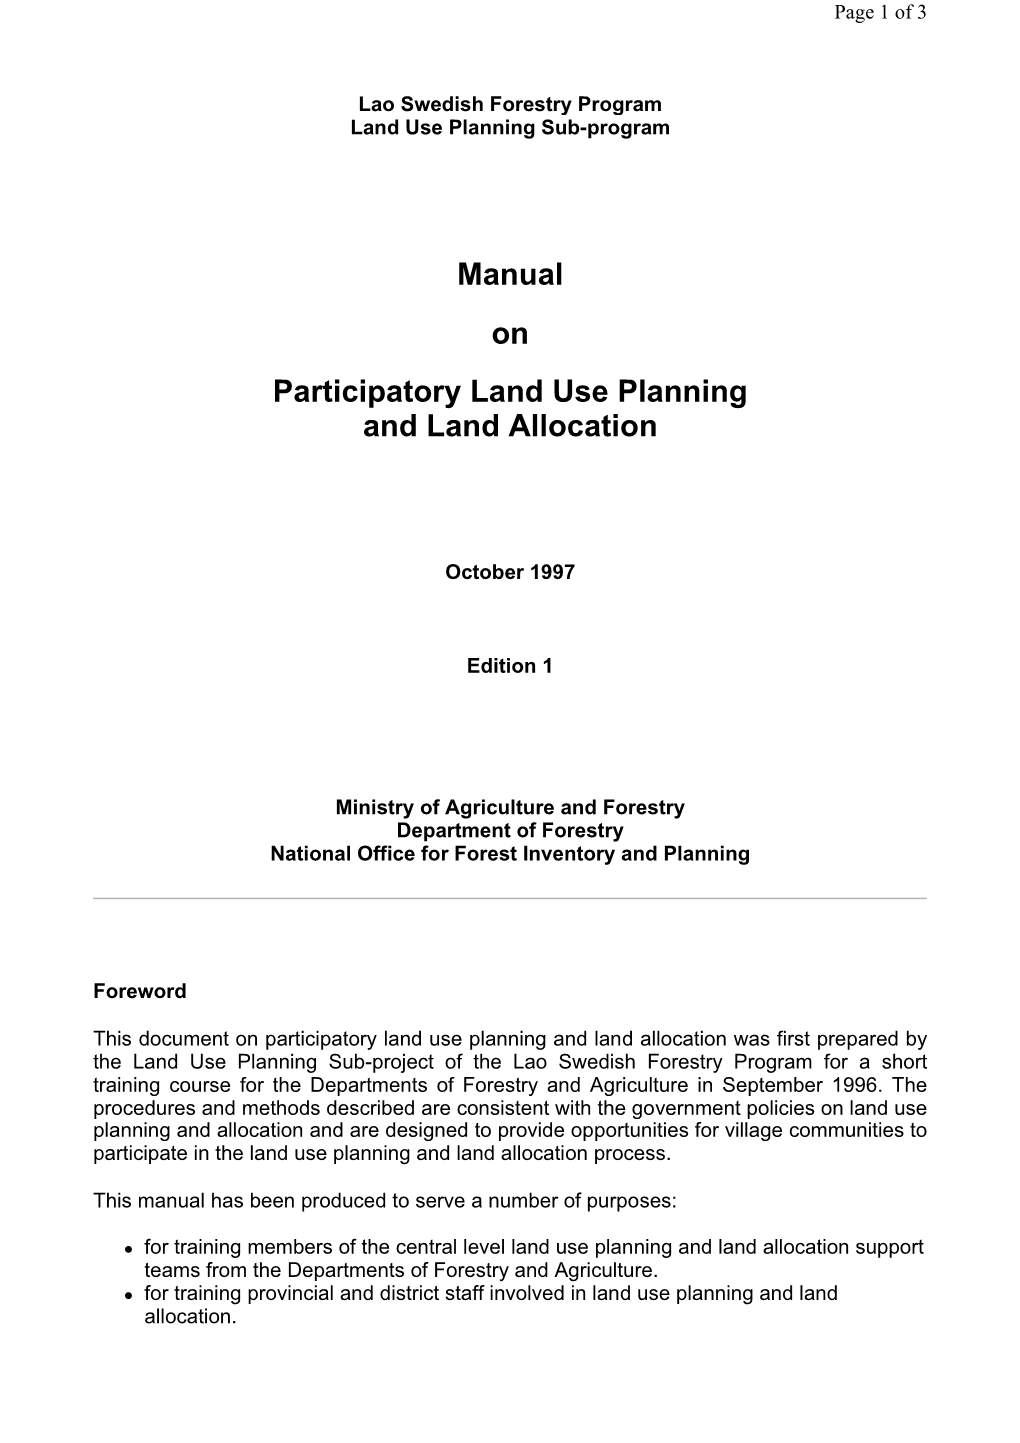 Manual on Participatory Land Use Planning and Land Allocation